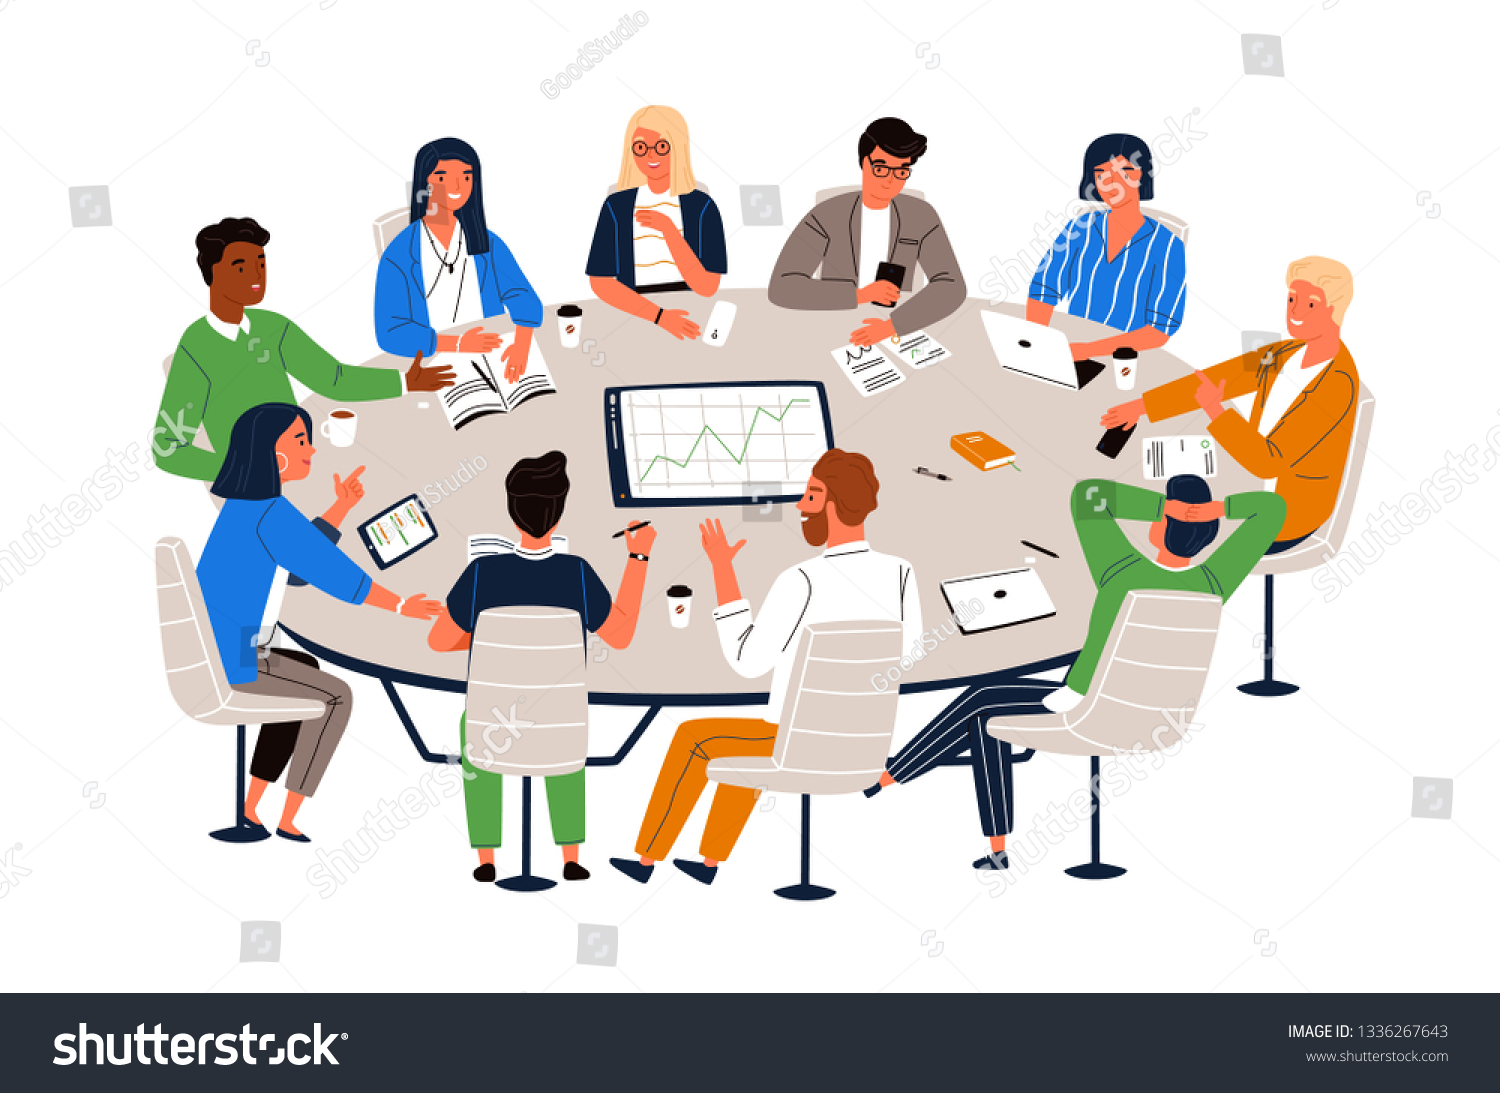 SVG of Office workers sitting at round table and discussing ideas, exchanging information. Work meeting, business negotiation, conference, group discussion. Cartoon vector illustration in flat style. svg